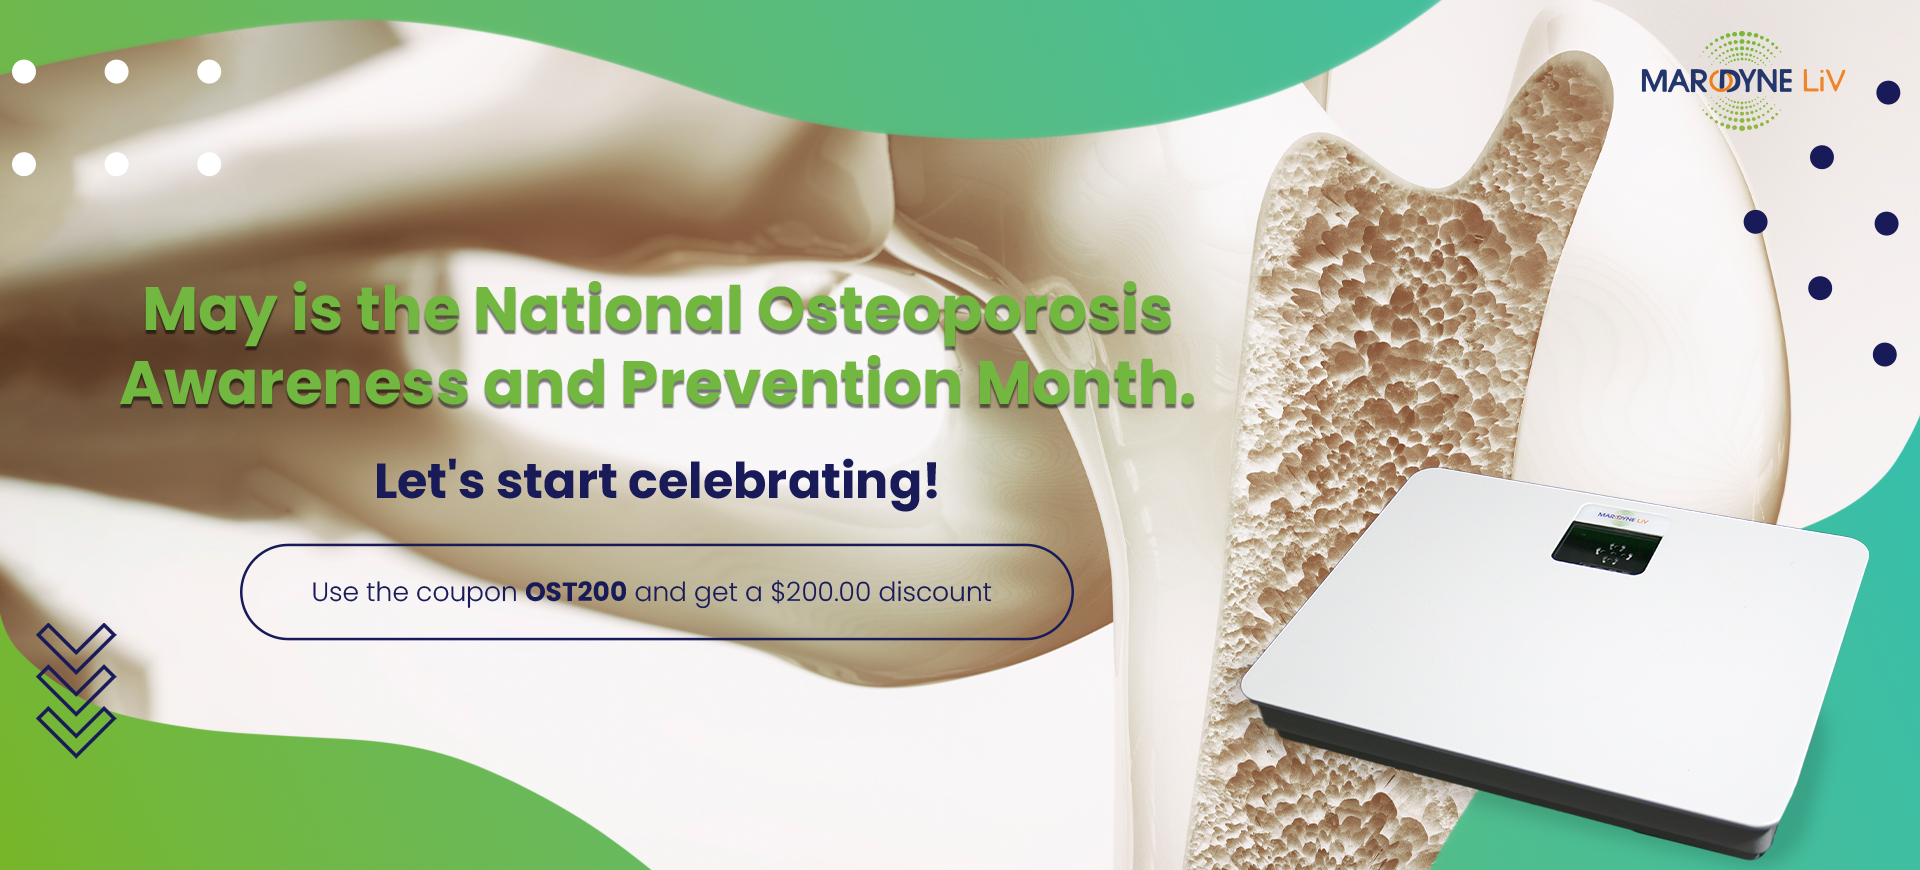 Banner_Osteoporosis Awareness month_v2.png__PID:d6e8dbd2-5b82-42f7-b460-aafd3f056c3d